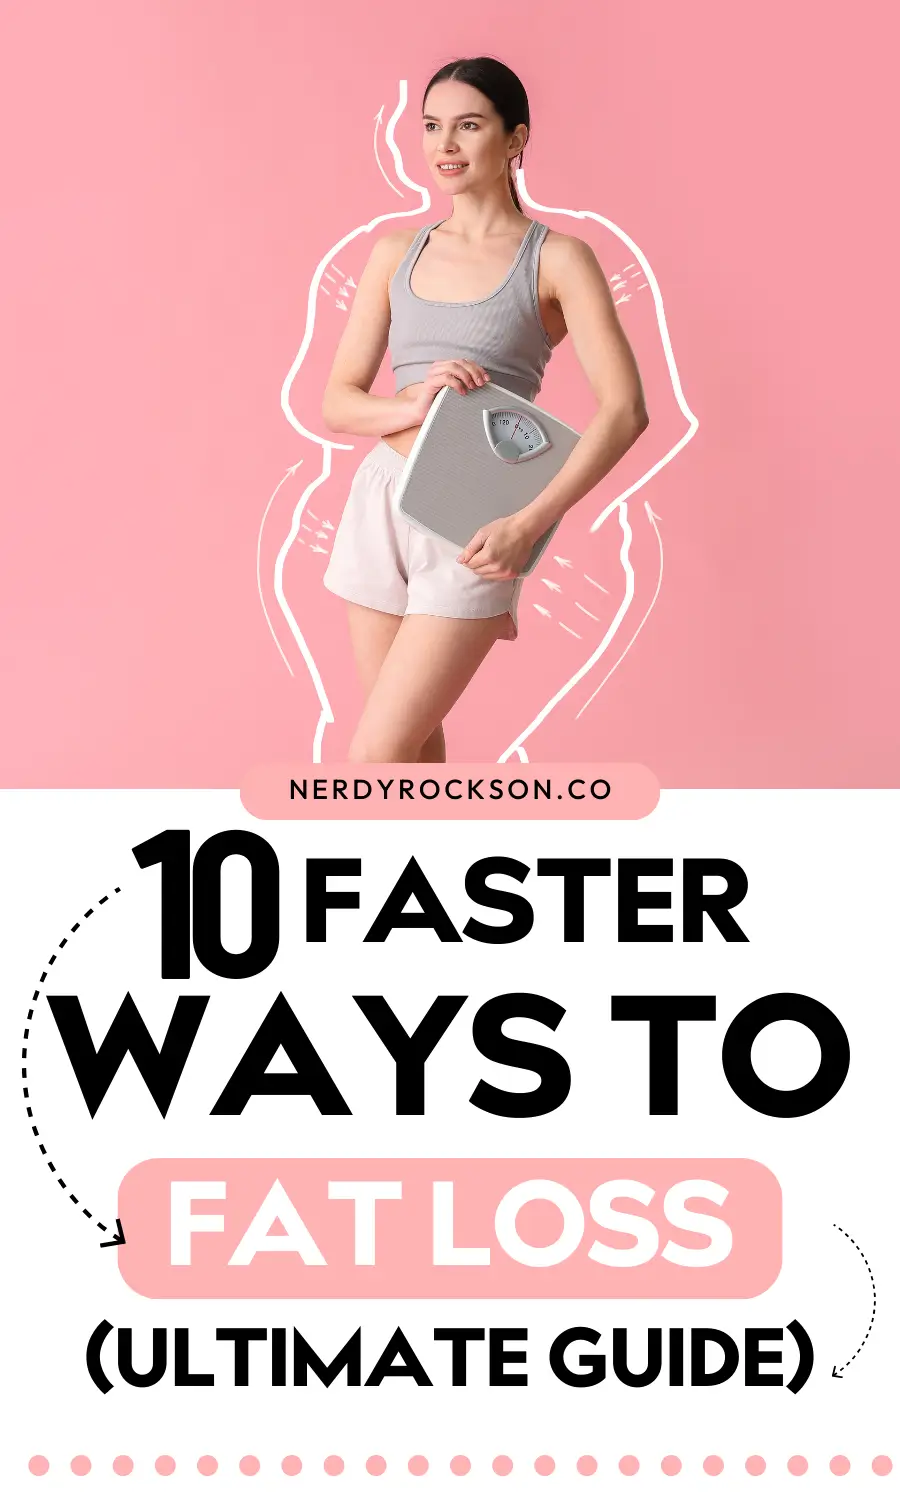 10 Faster Ways to Fat Loss